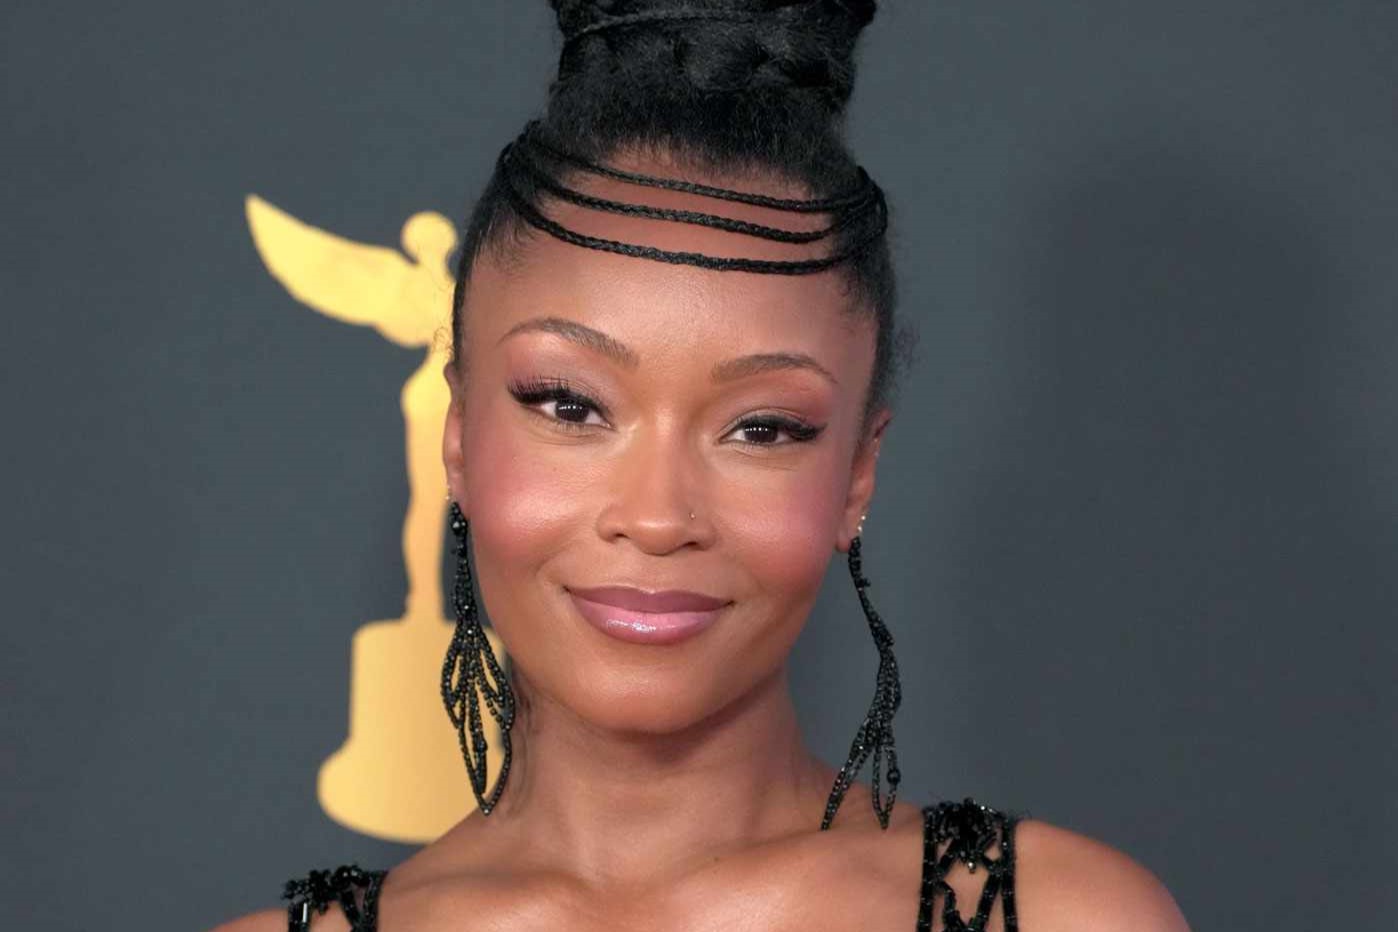 11 Surprising Facts About Yaya DaCosta - Facts.net